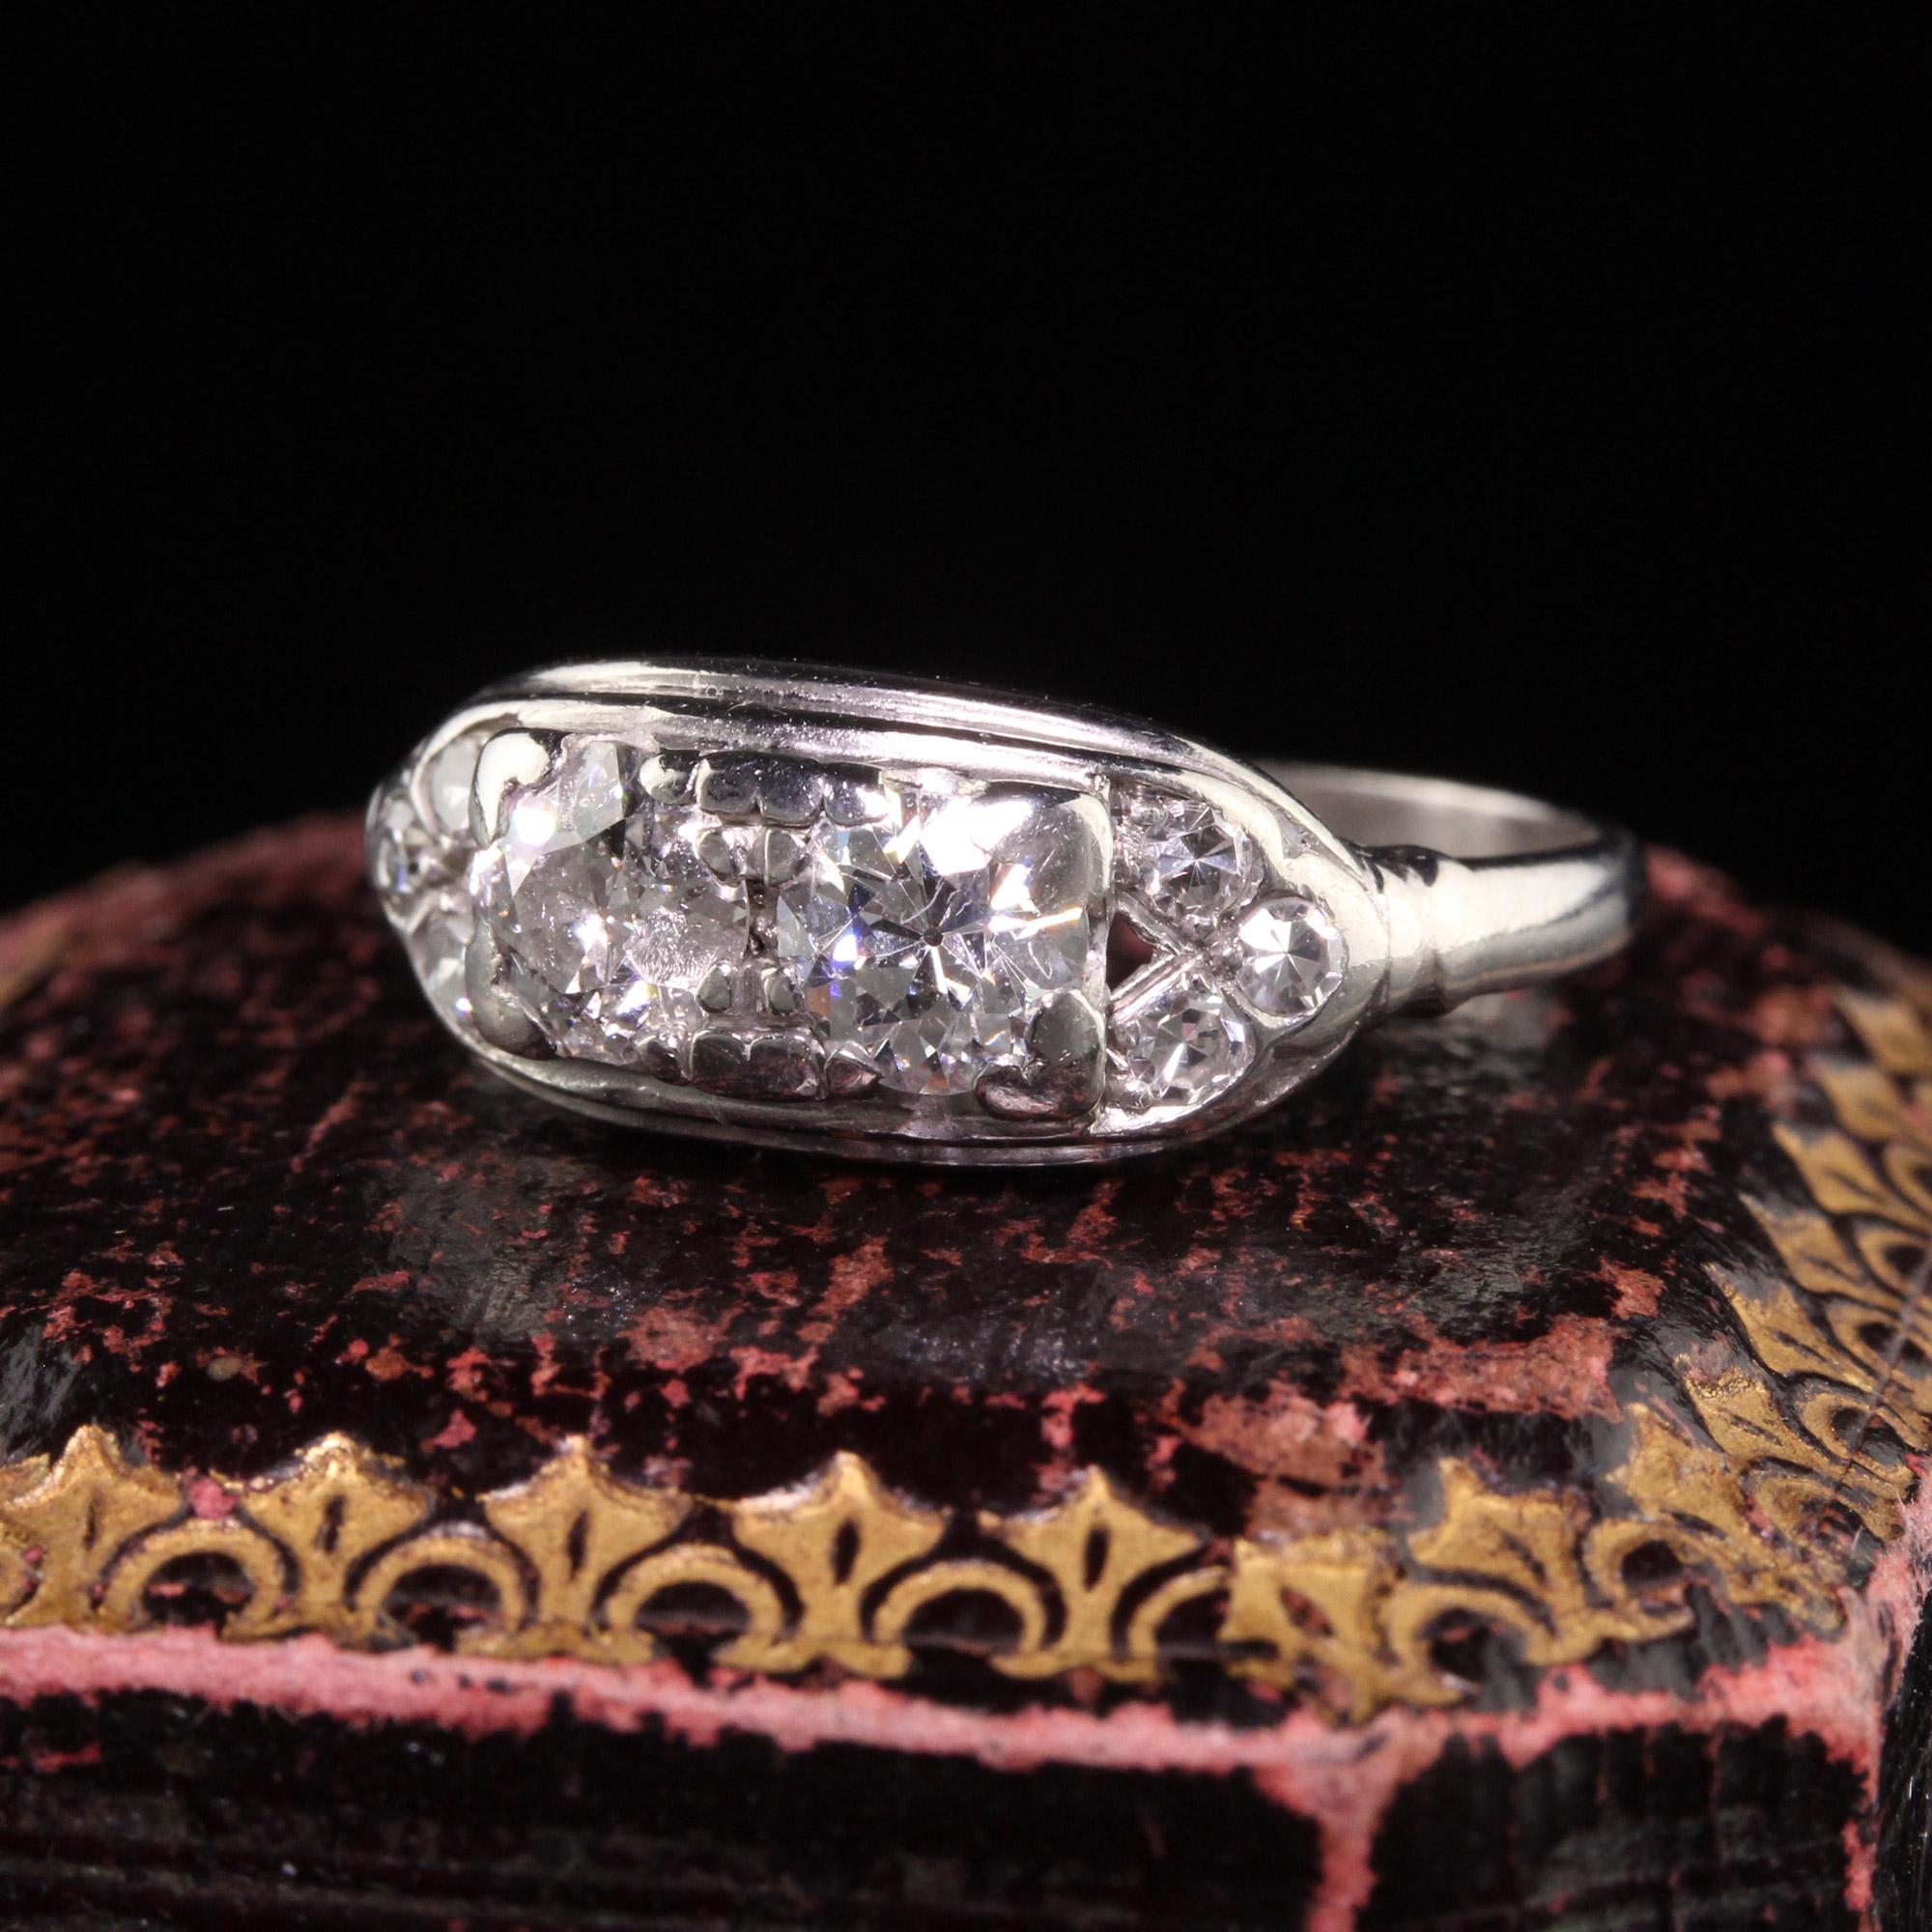 Beautiful Antique Art Deco Platinum Two Stone Old Mine Diamond Ring. This beautiful ring is crafted in platinum. The ring holds two old european cut diamonds with three single cut diamonds on each side. One of the larger diamonds is chipped but it